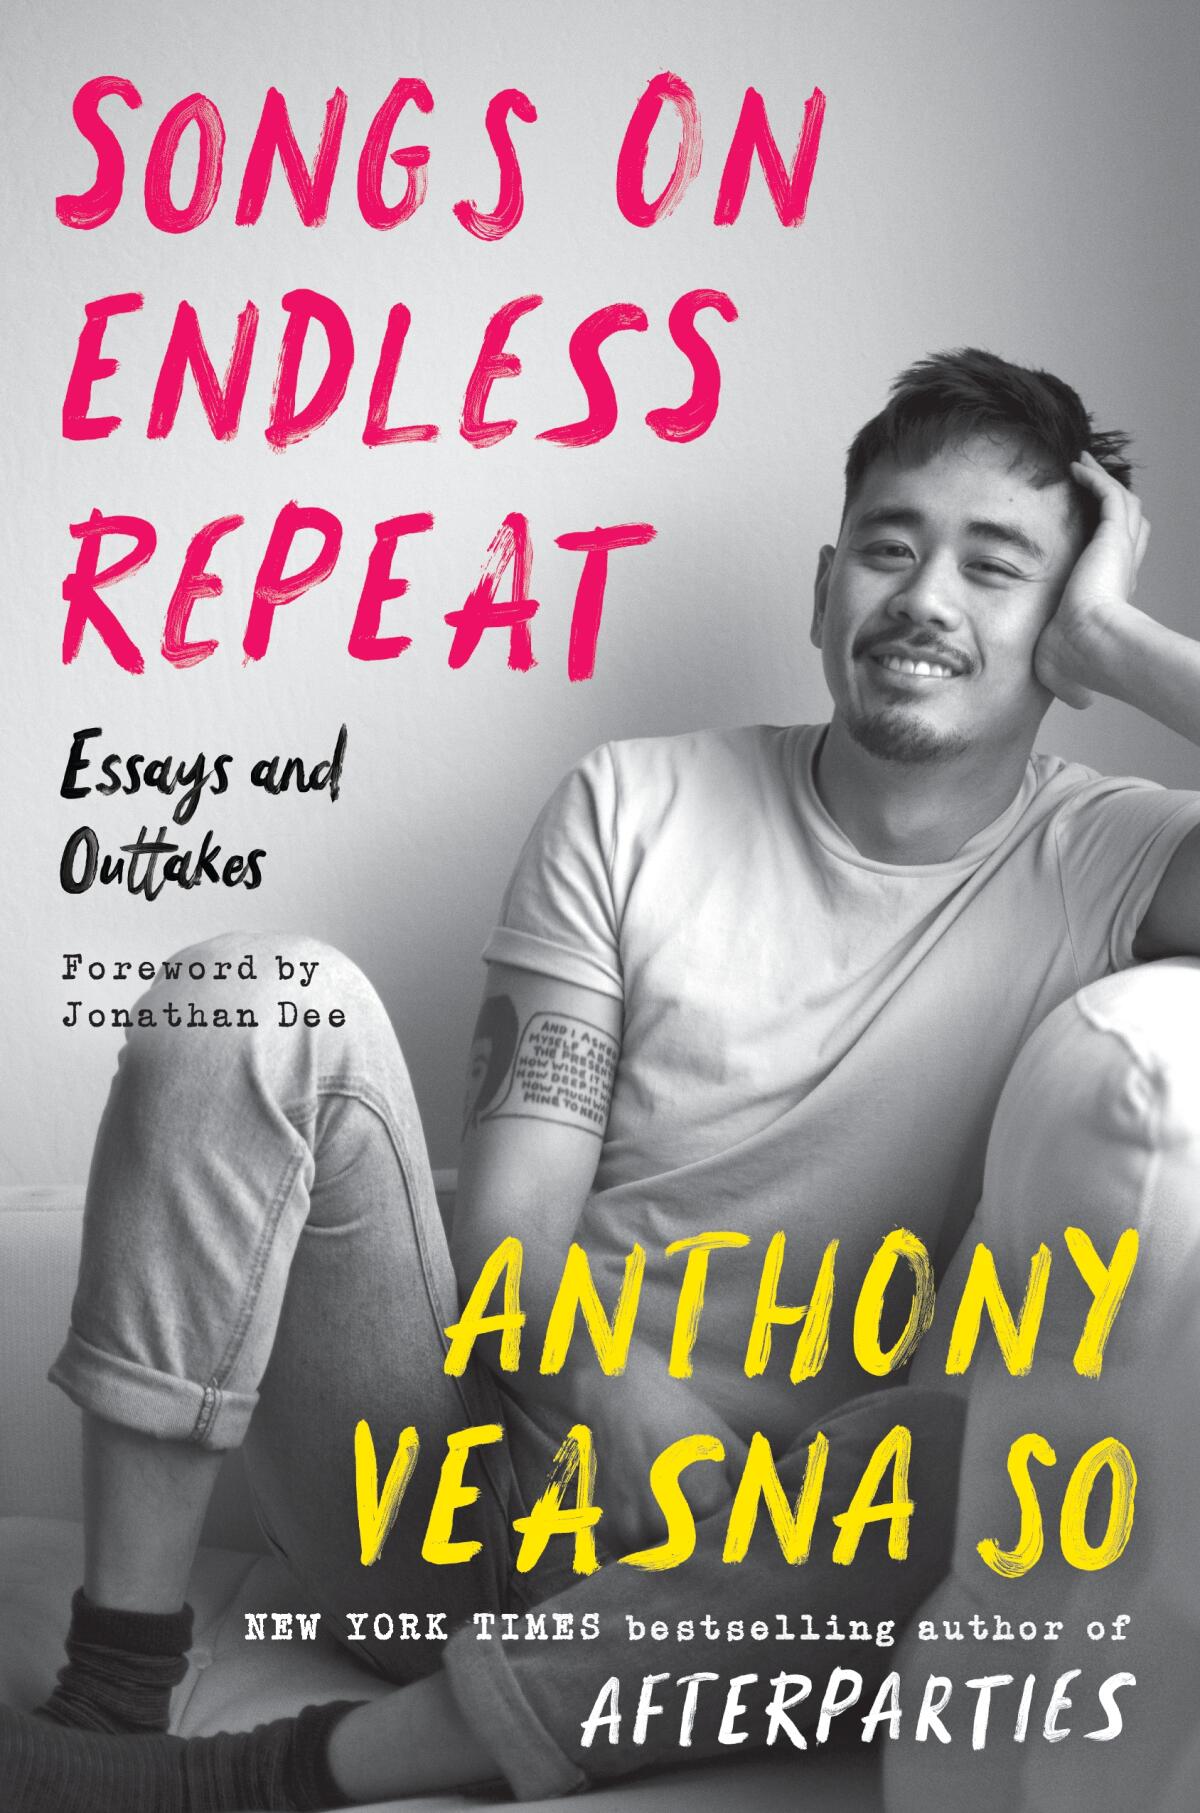 "Songs on Endless Repeat," by Anthony Veasna So